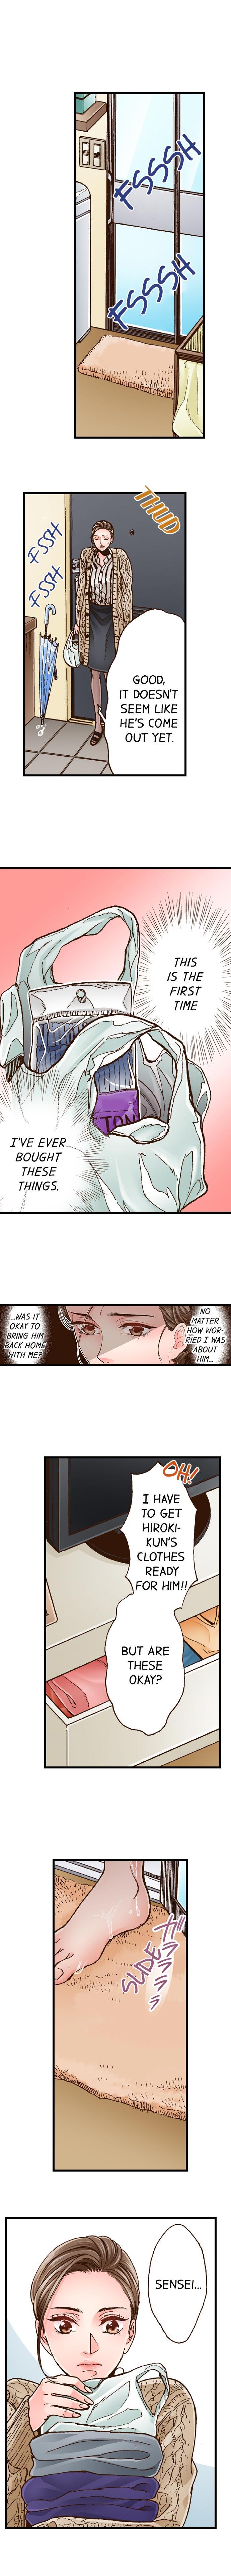 Yanagihara Is a Sex Addict - Chapter 16 Page 5